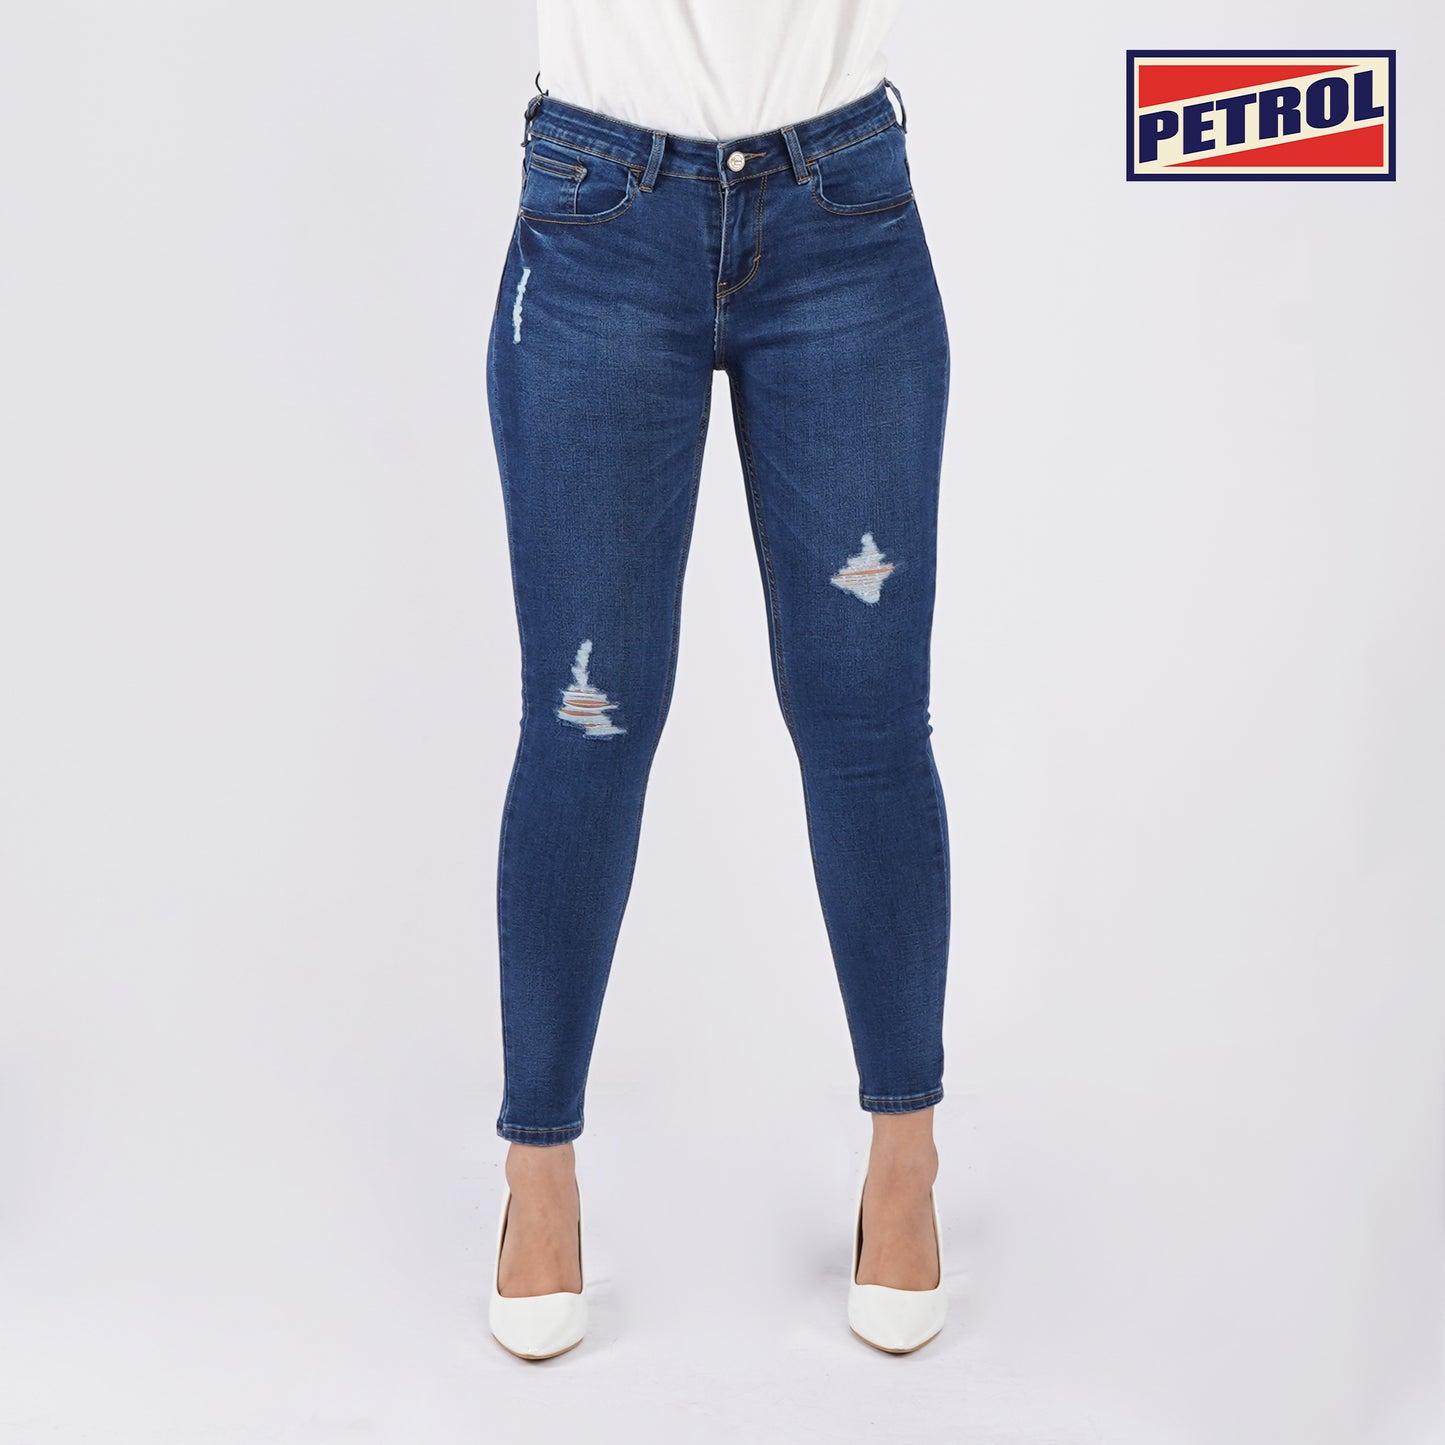 Petrol Ladies Basic Denim Fashionable Casual Apparel Stretchable Maong Pants For Women Super skinny Fitting High waist Trendy Fashion High Quality Stretchable Jeans For Women 147266 (Medium Shade)